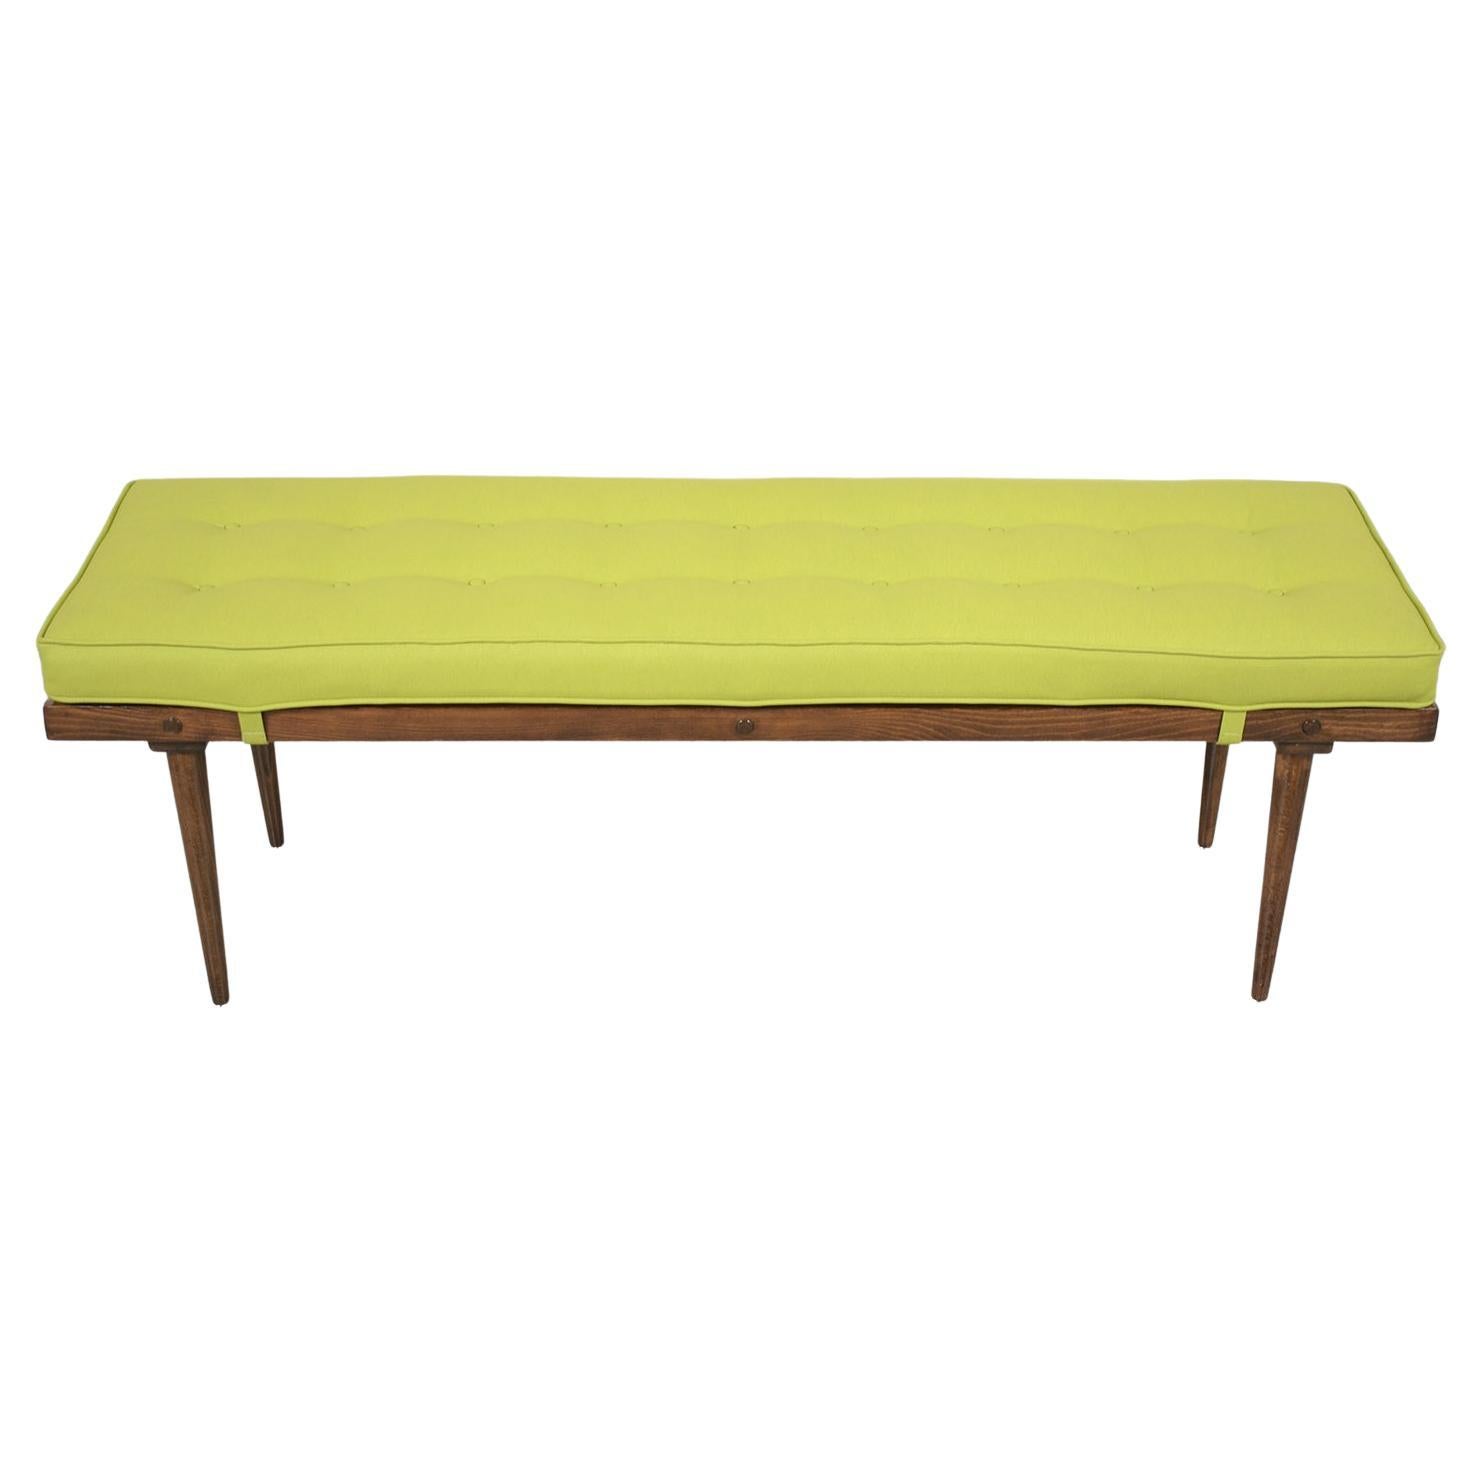 Restored Mid-Century Slatted Wood Bench with Green Vinyl Cushion For Sale